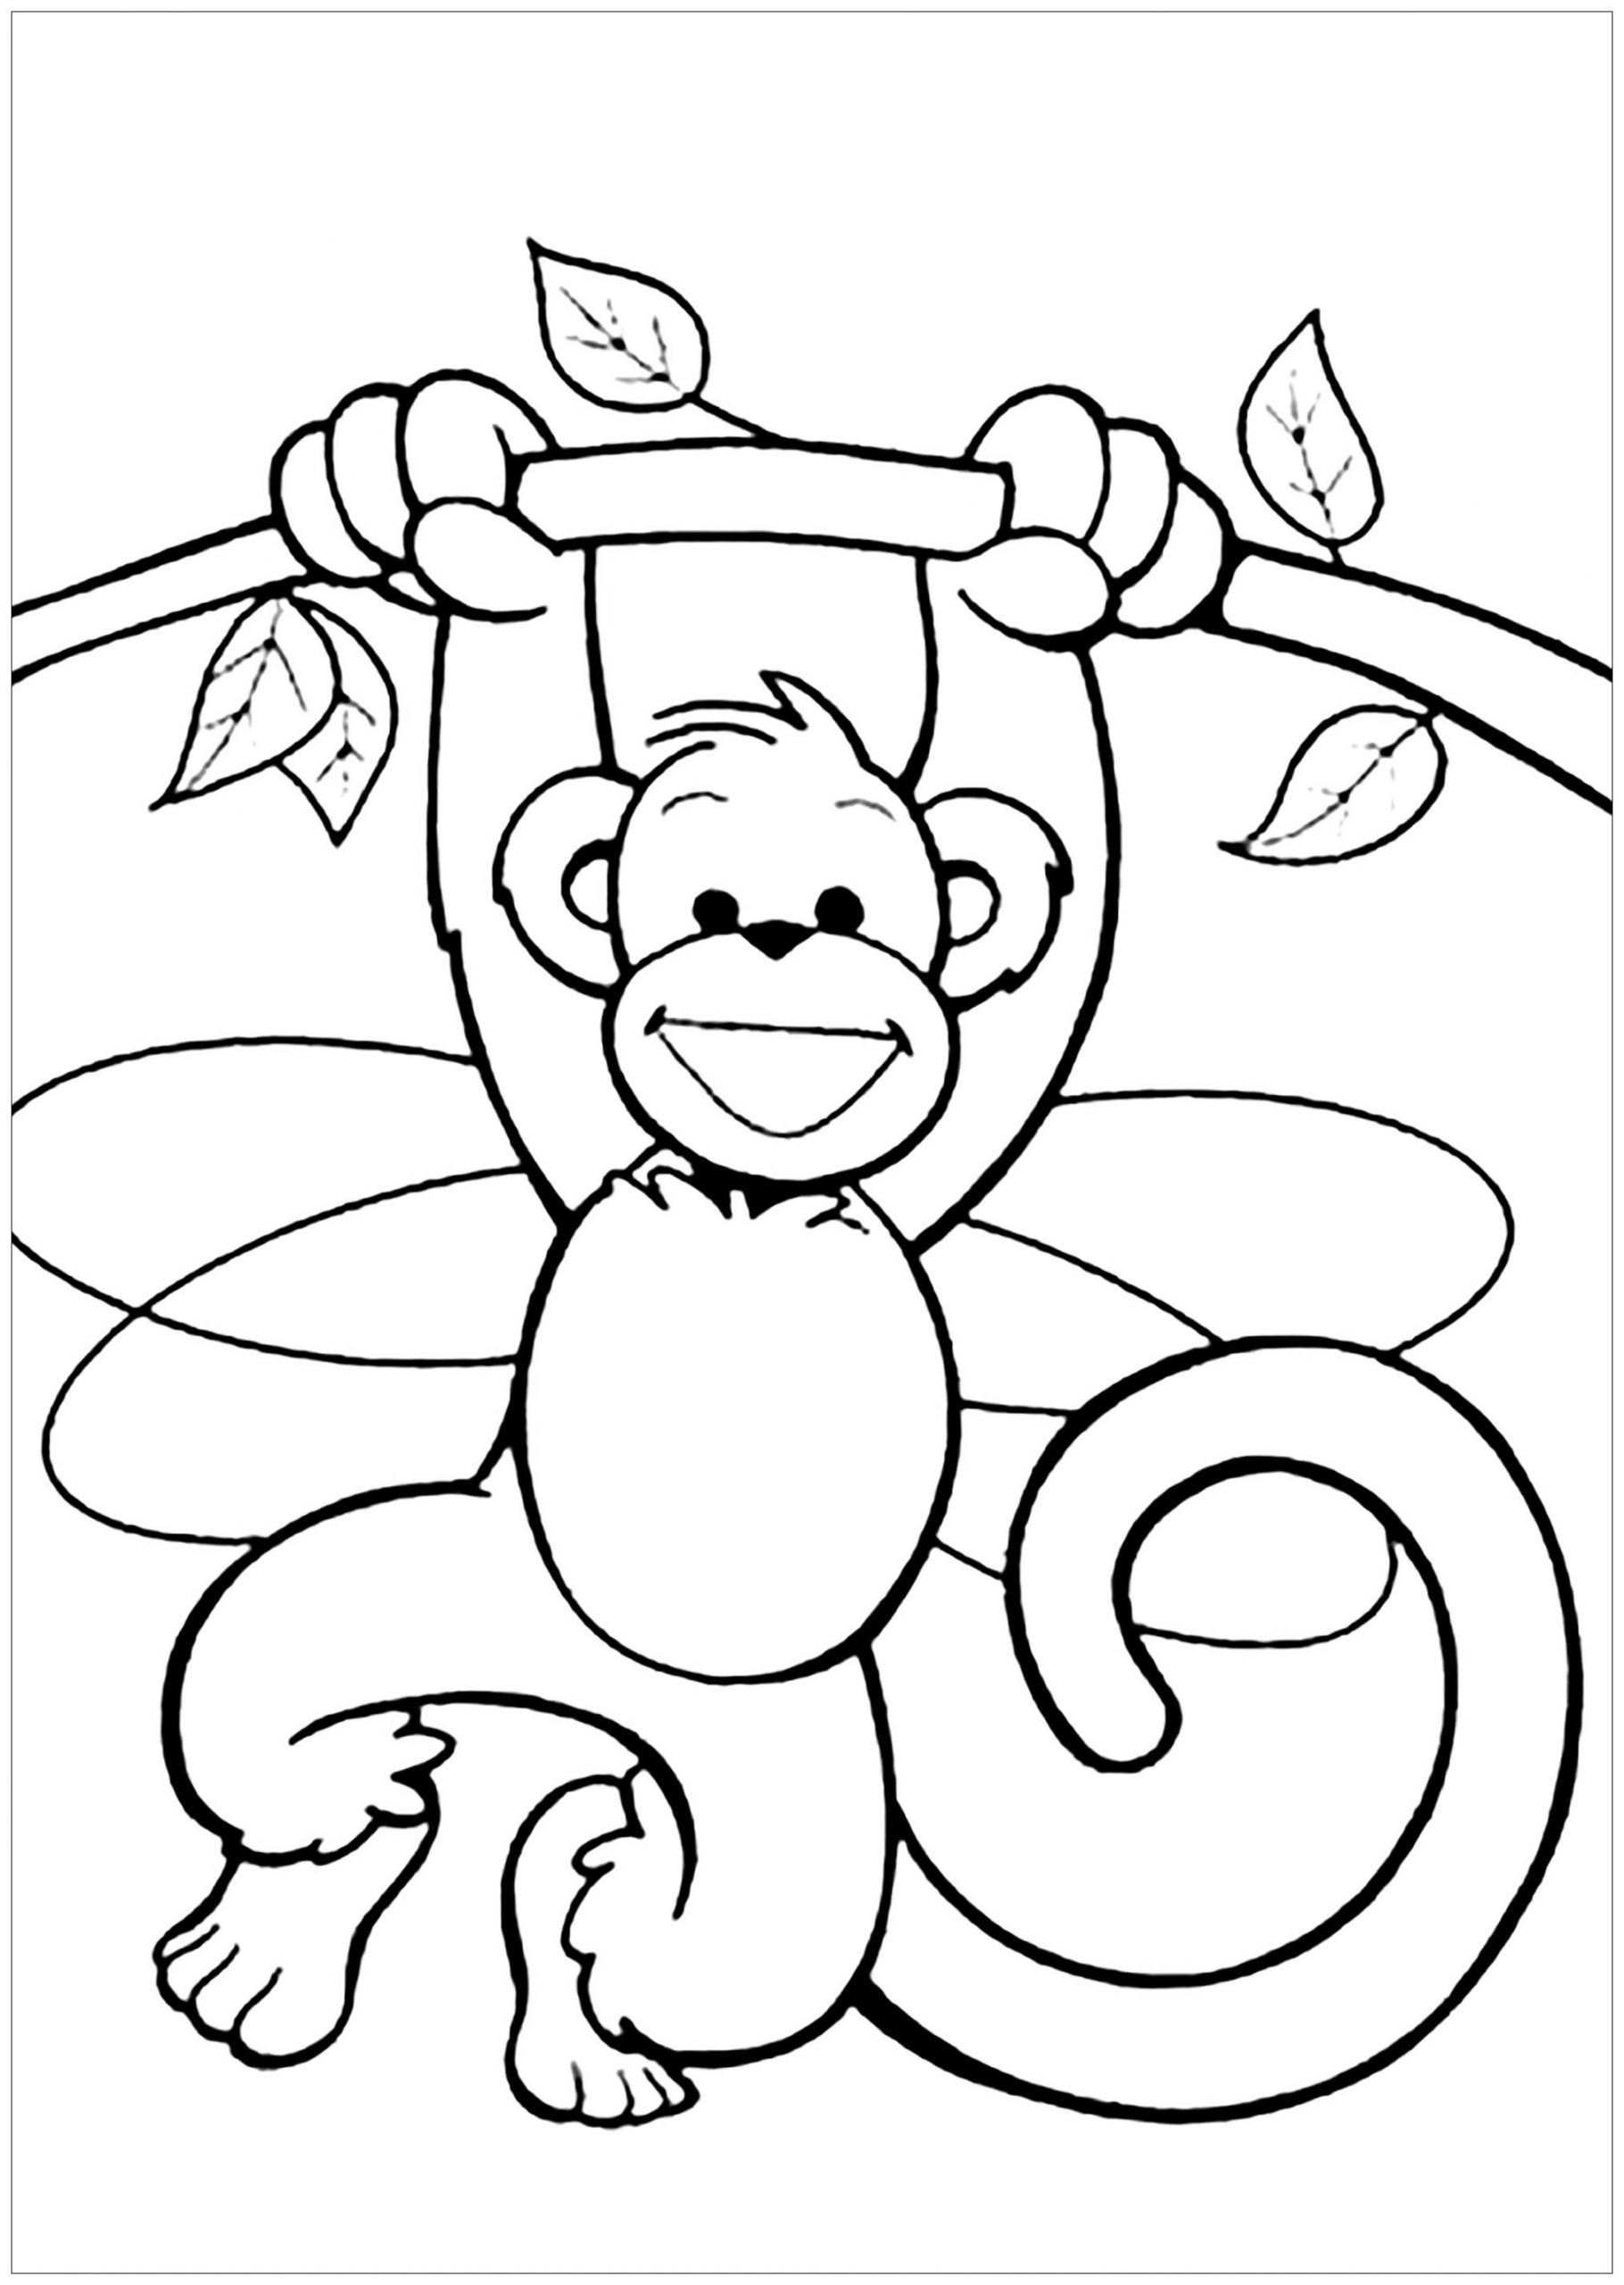 Kids Coloring Pages Free
 Monkeys to for free Monkeys Kids Coloring Pages